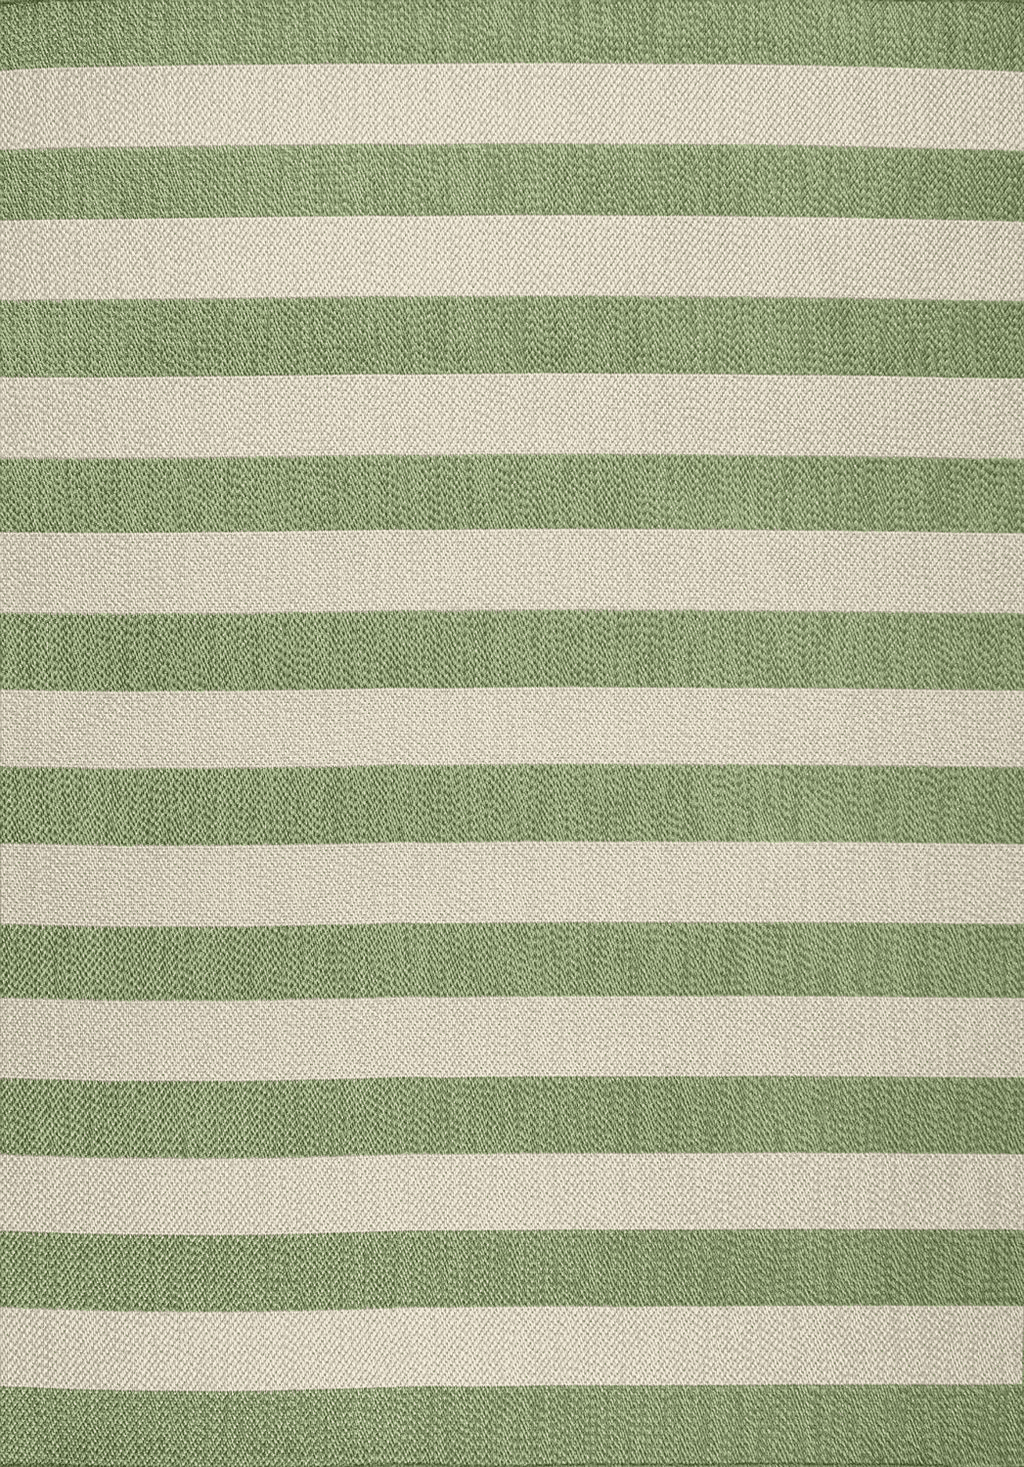 Eyely BMS203D-4 Santa Monica Negril Two-Tone Wide Stripe Indoor/Outdoor Area Rug Modern;Coastal;Rustic, Bedroom, Kitchen, Backyard, Patio, Easy-Cleaning, Non-Shedding, 4 X 6, Green/Cream